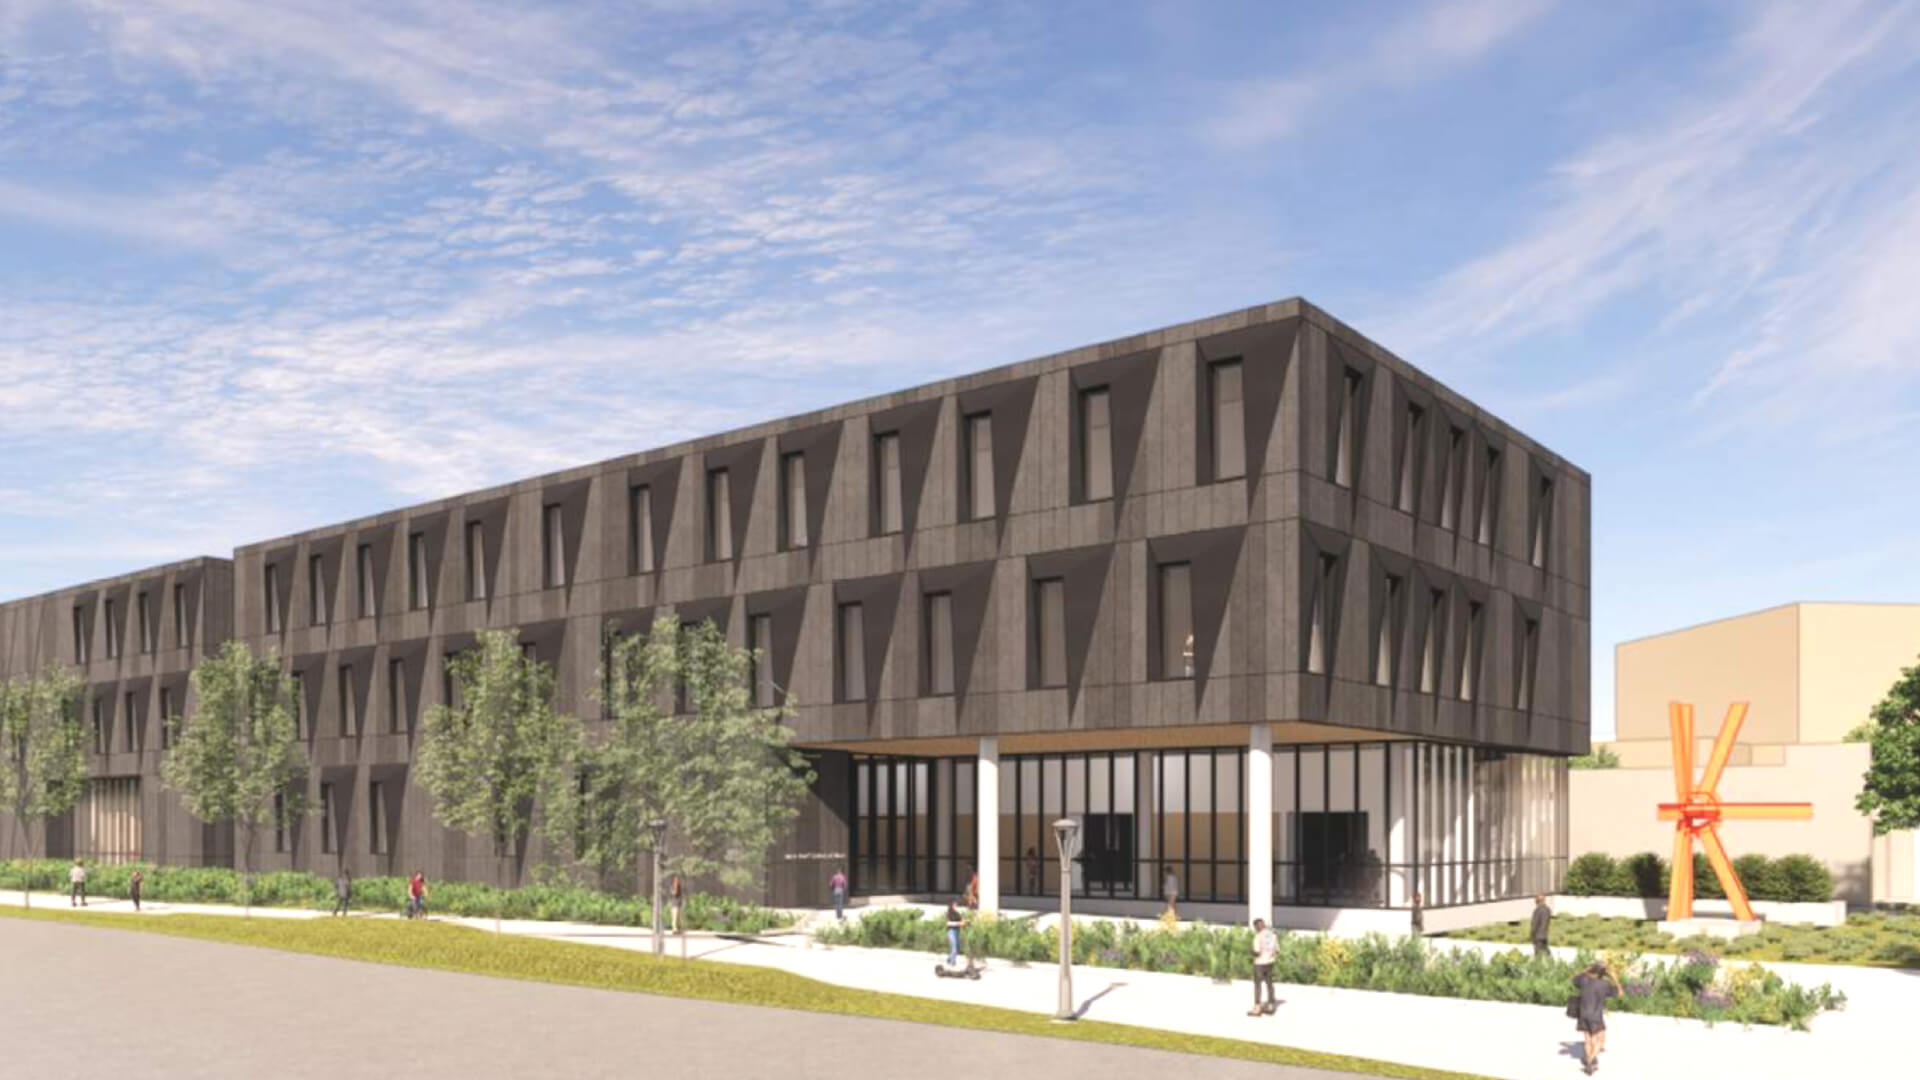 Architectural rendering of the new Westbrook Music Building estimated to be completed in Spring 2025